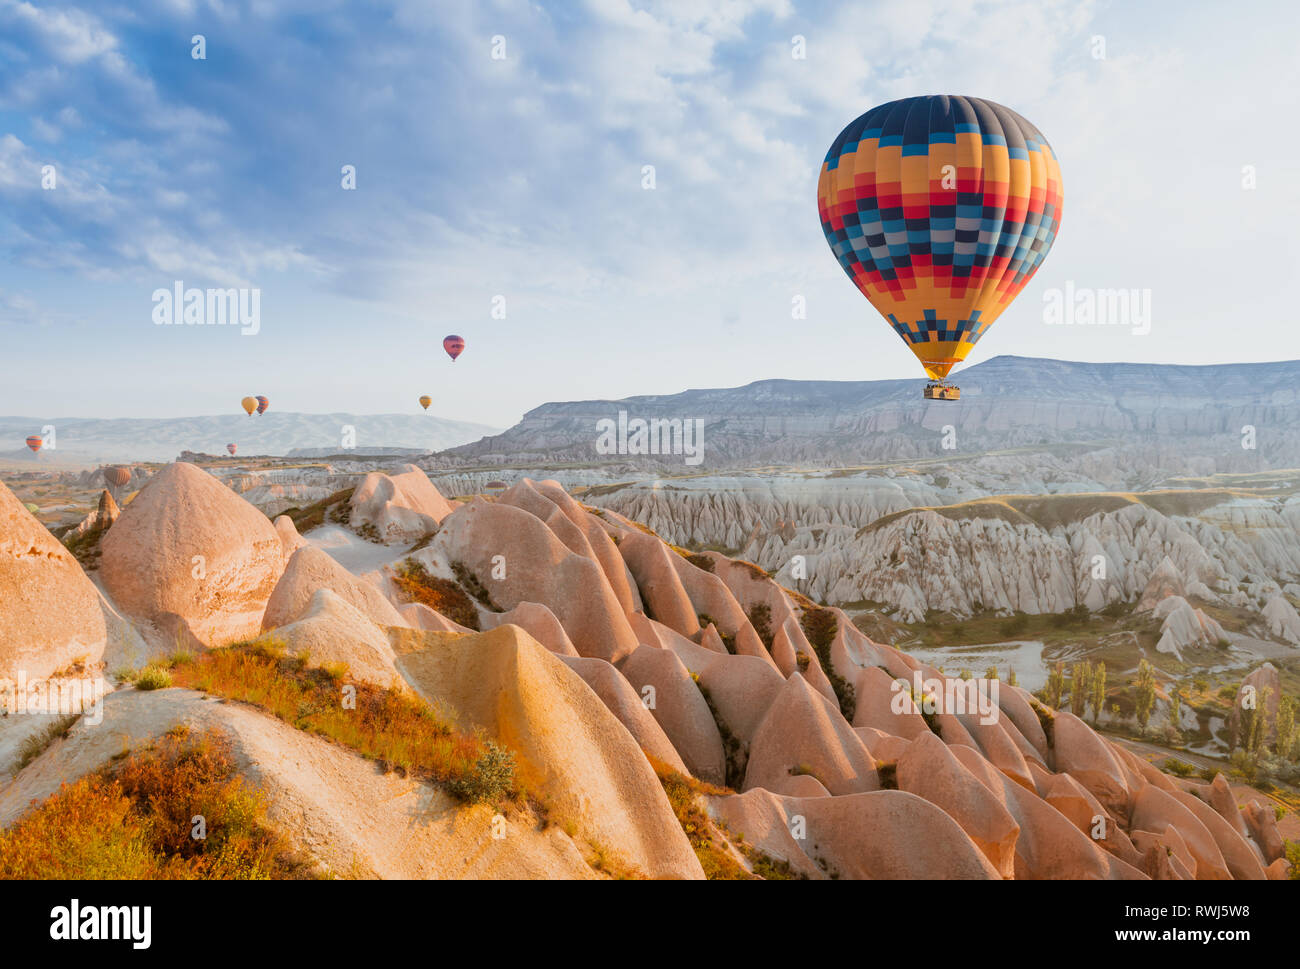 great tourist attraction of Cappadocia balloon flight. Cappadocia is one of the best places to fly with hot air balloons. Goreme, Cappadocia, Turkey. Stock Photo